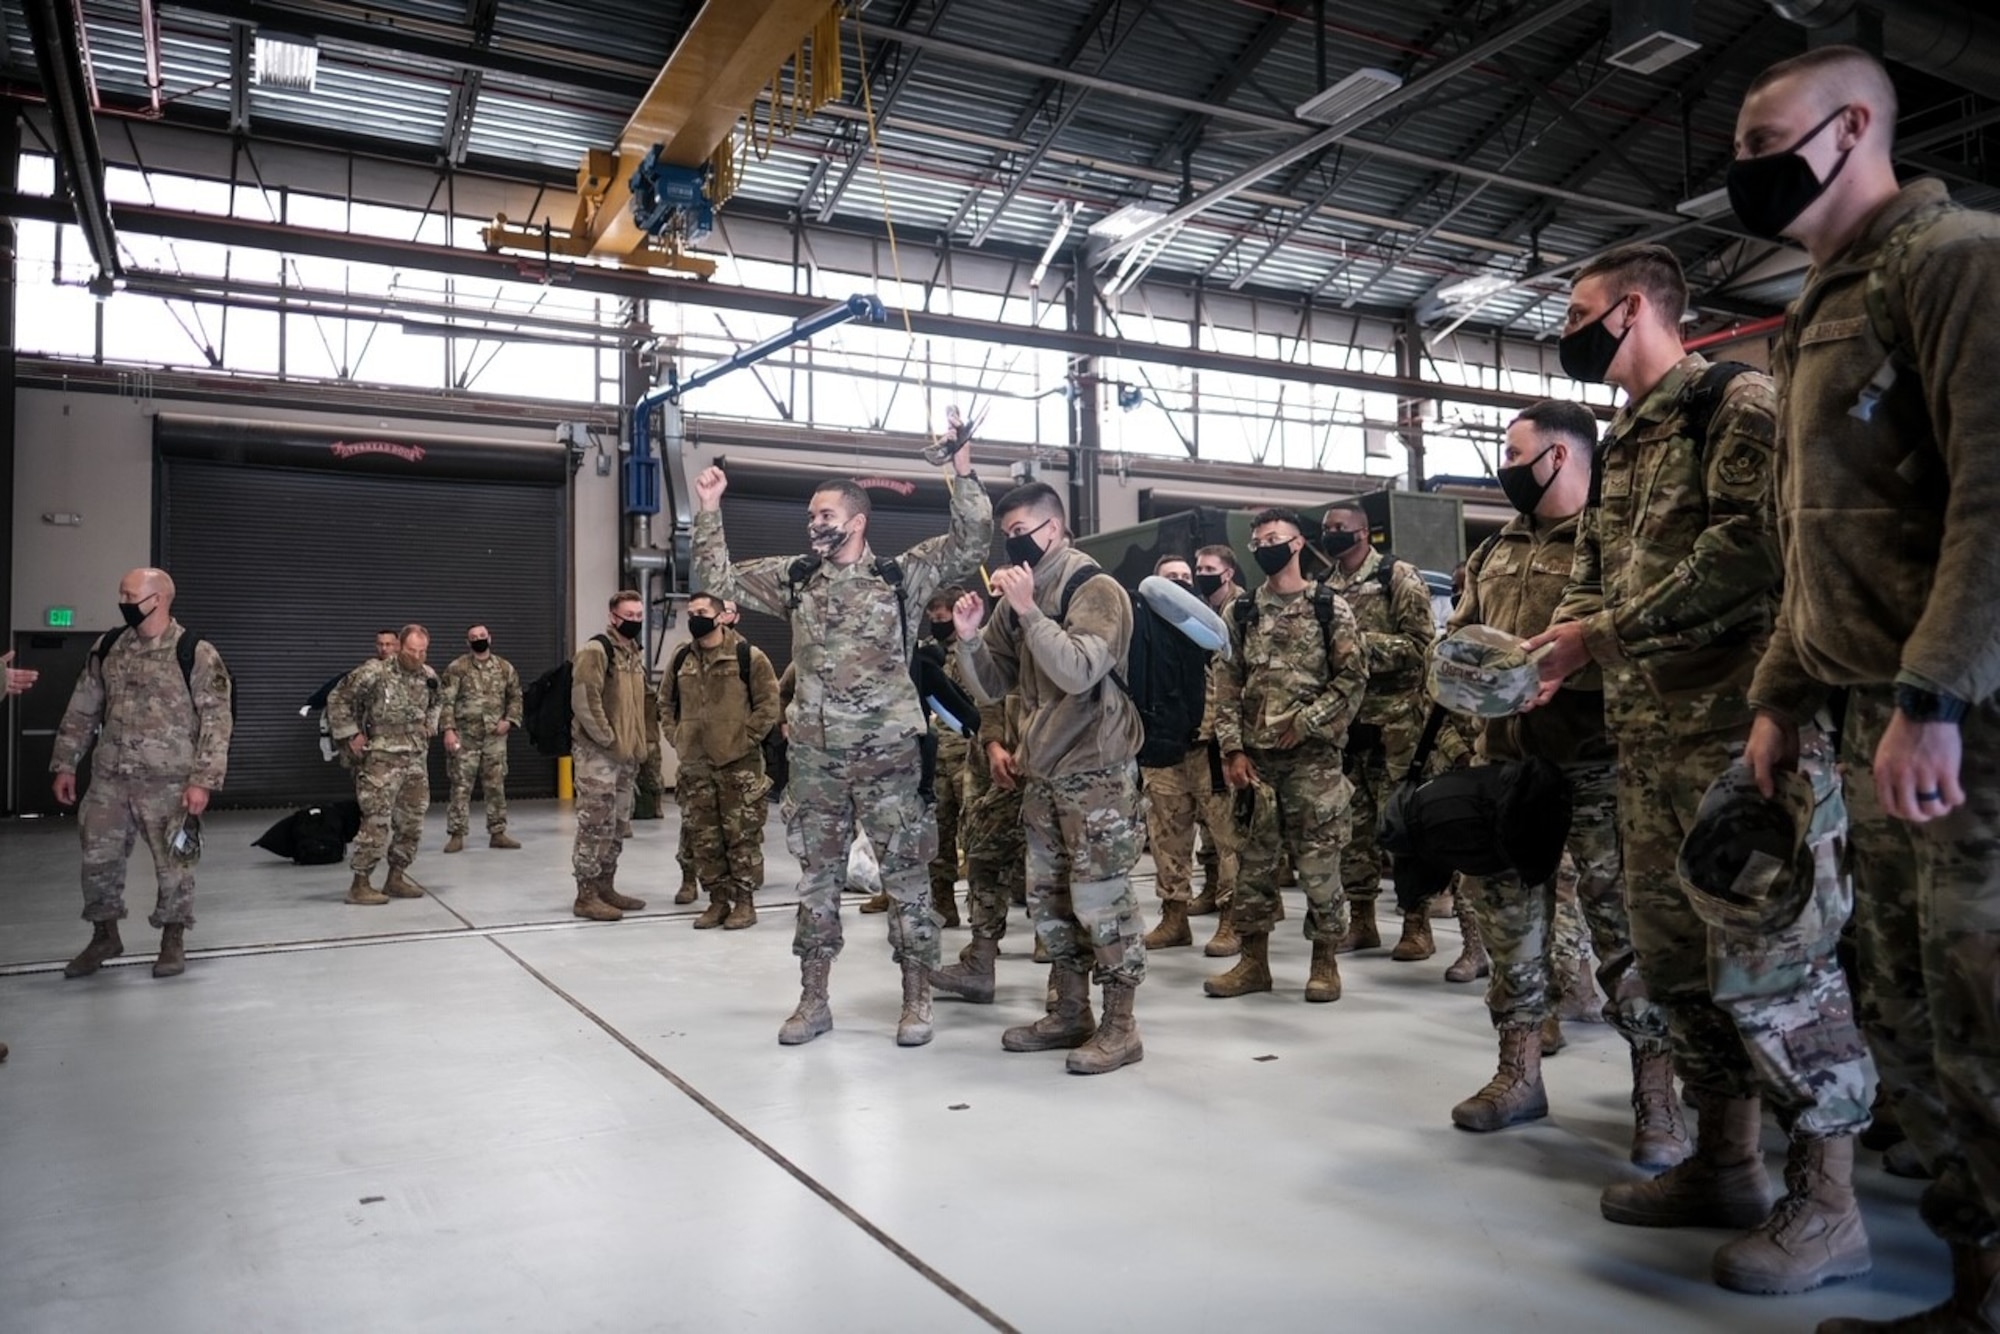 Airmen assigned to the 729th Air Control Squadron father in a hangar after returning home.